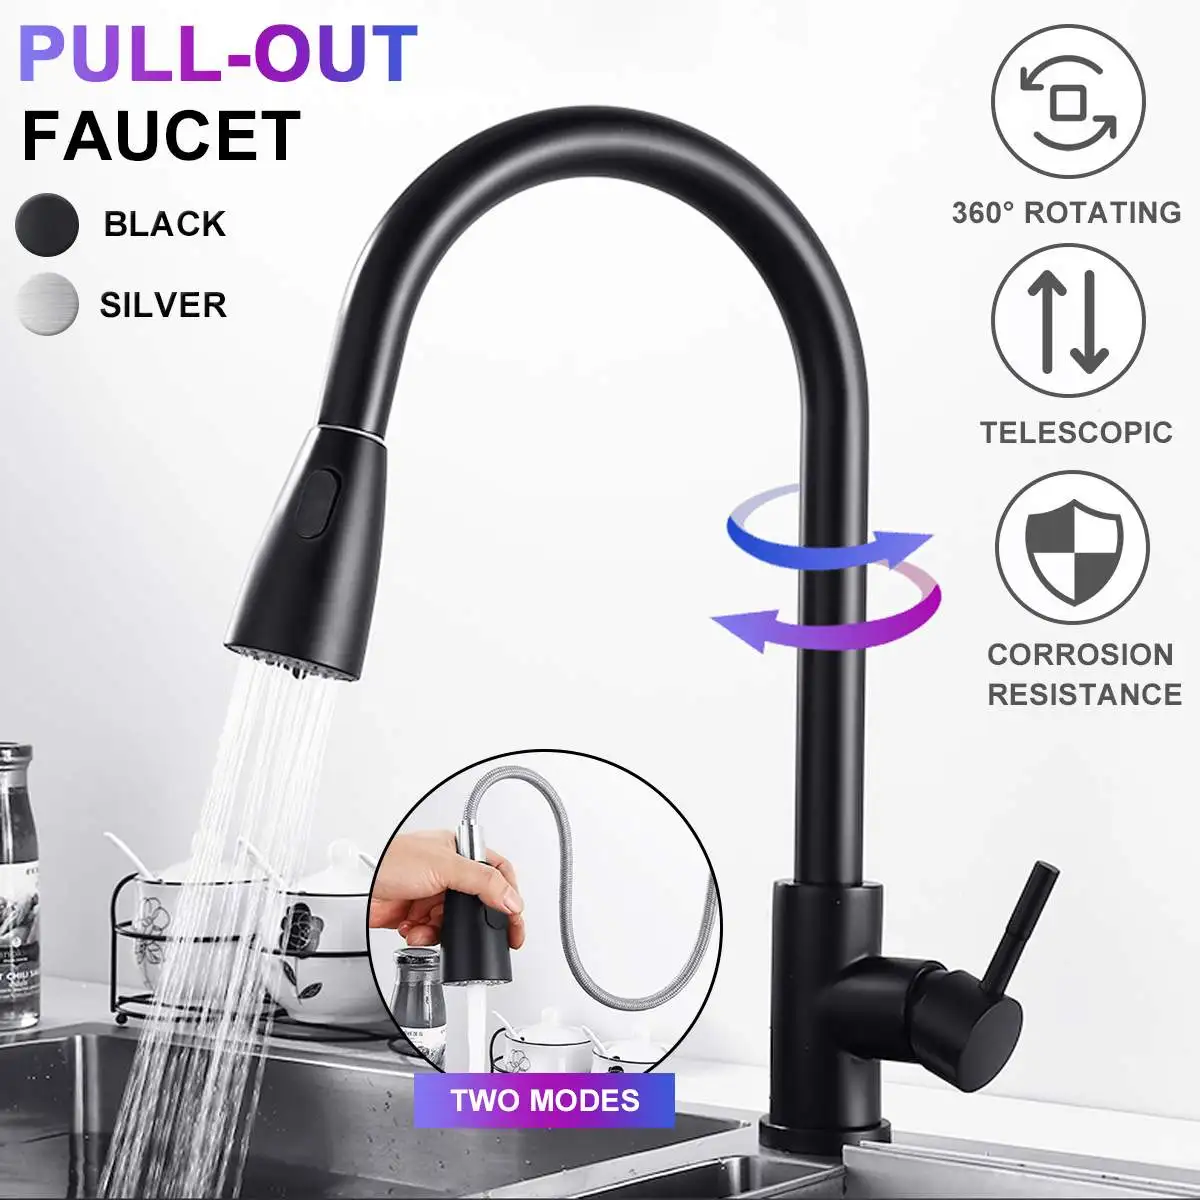 

Kitchen Faucet Black/Sliver Single Handle Pull Out Spout Kitchen Sink Mixer Tap Single Hole 360 Rotation Brushed Nickel Faucets